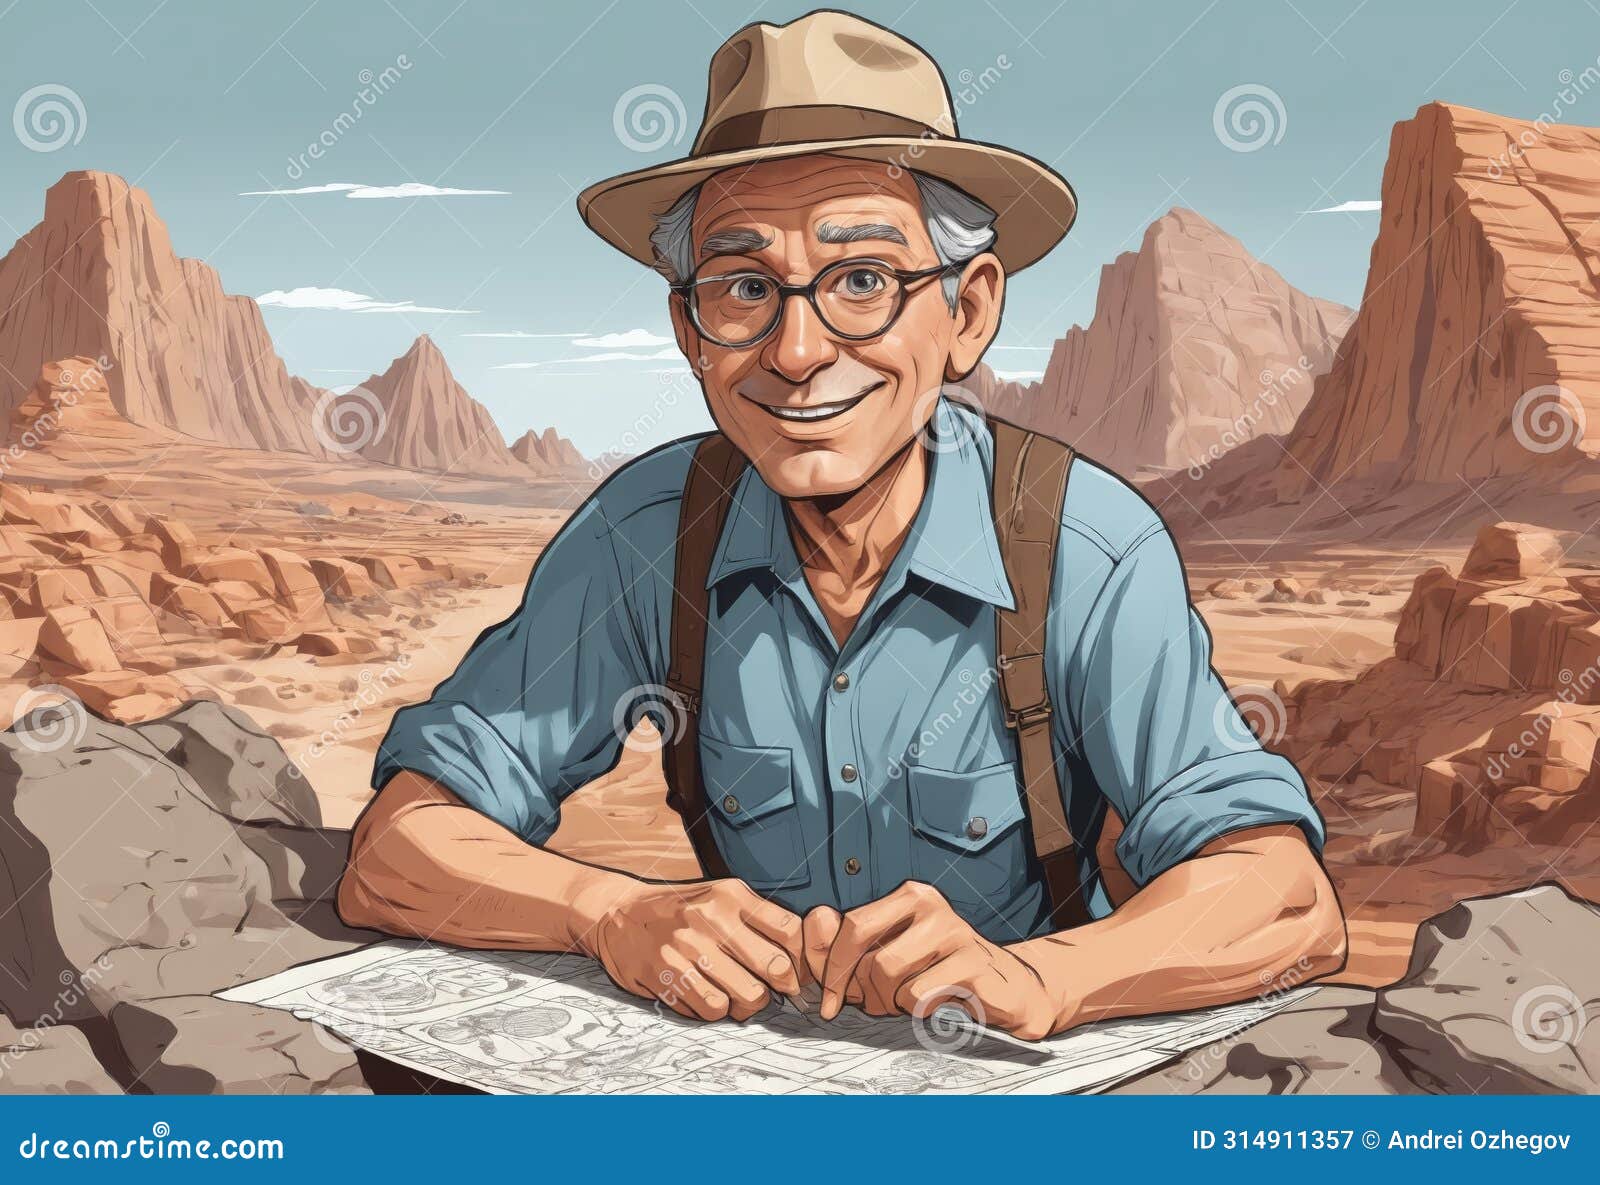 desert navigator: explorer with map amidst towering plateaus